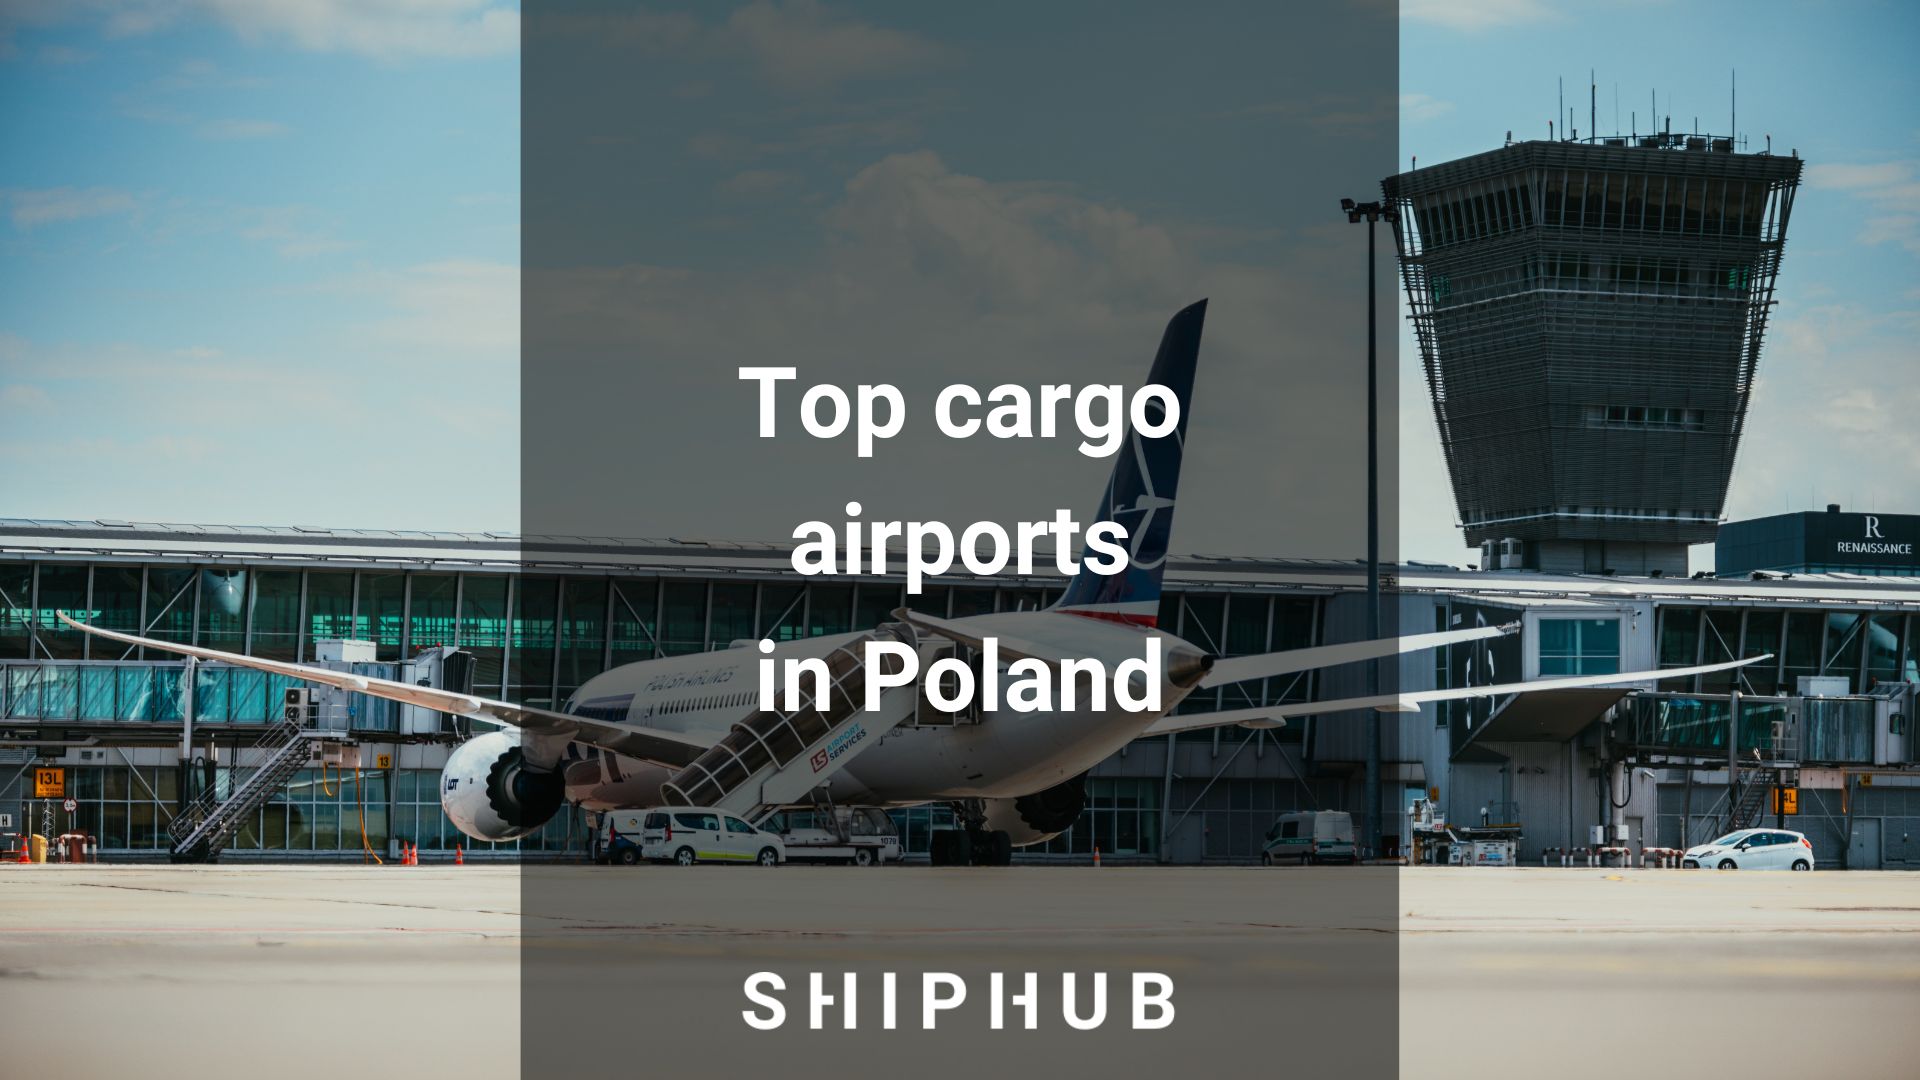 Top cargo airports in Poland